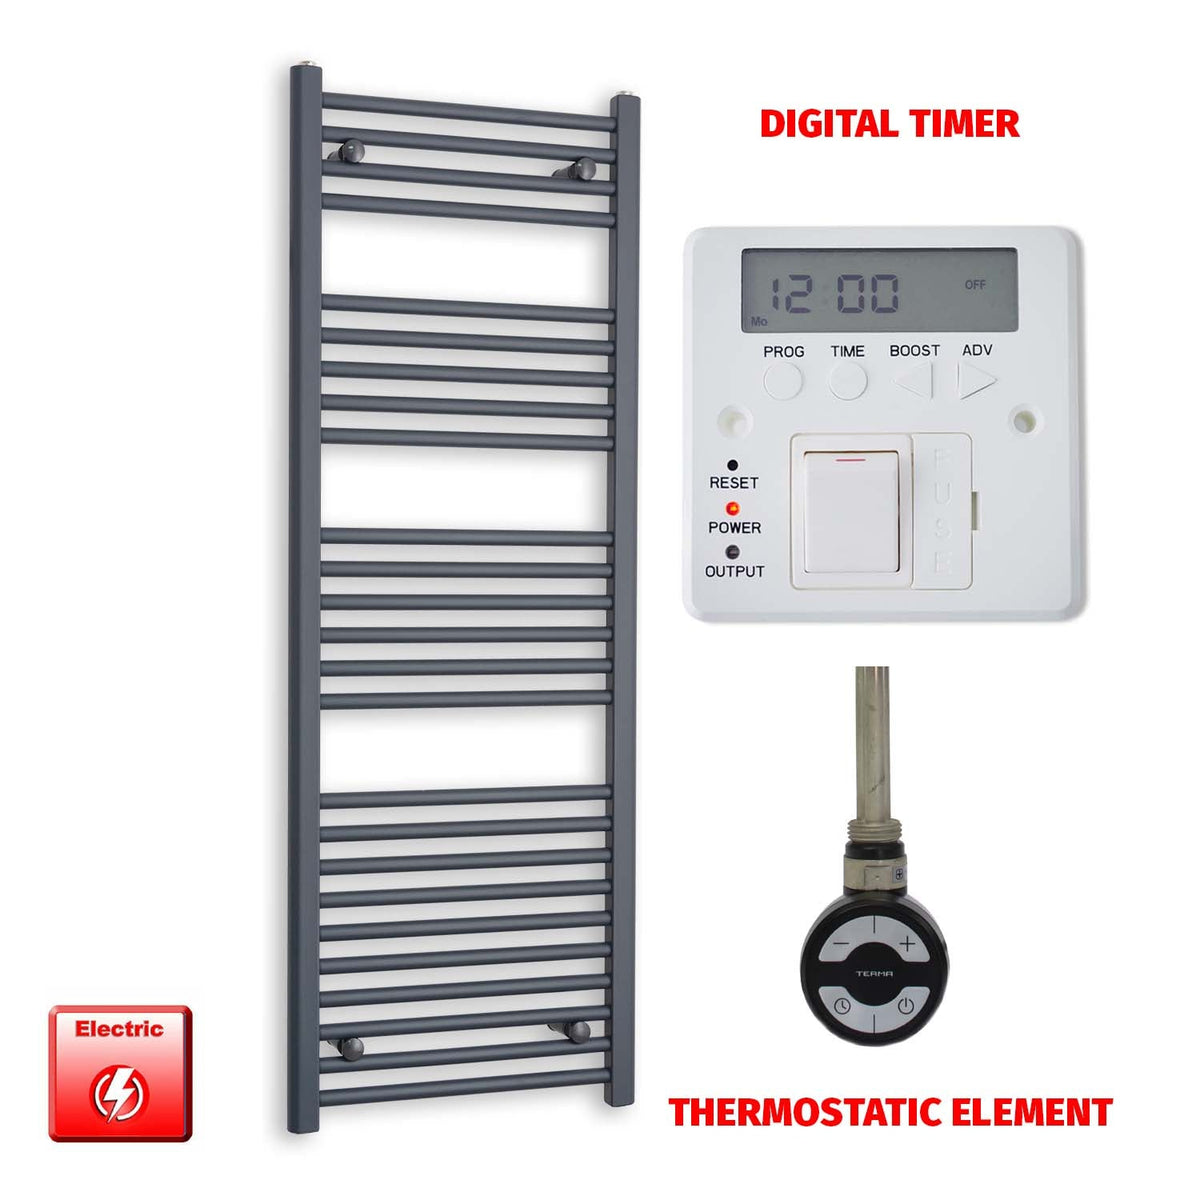 1400mm High 500mm Wide Flat Anthracite Pre-Filled Electric Heated Towel Rail Radiator HTR MOA Thermostatic element Digital timer